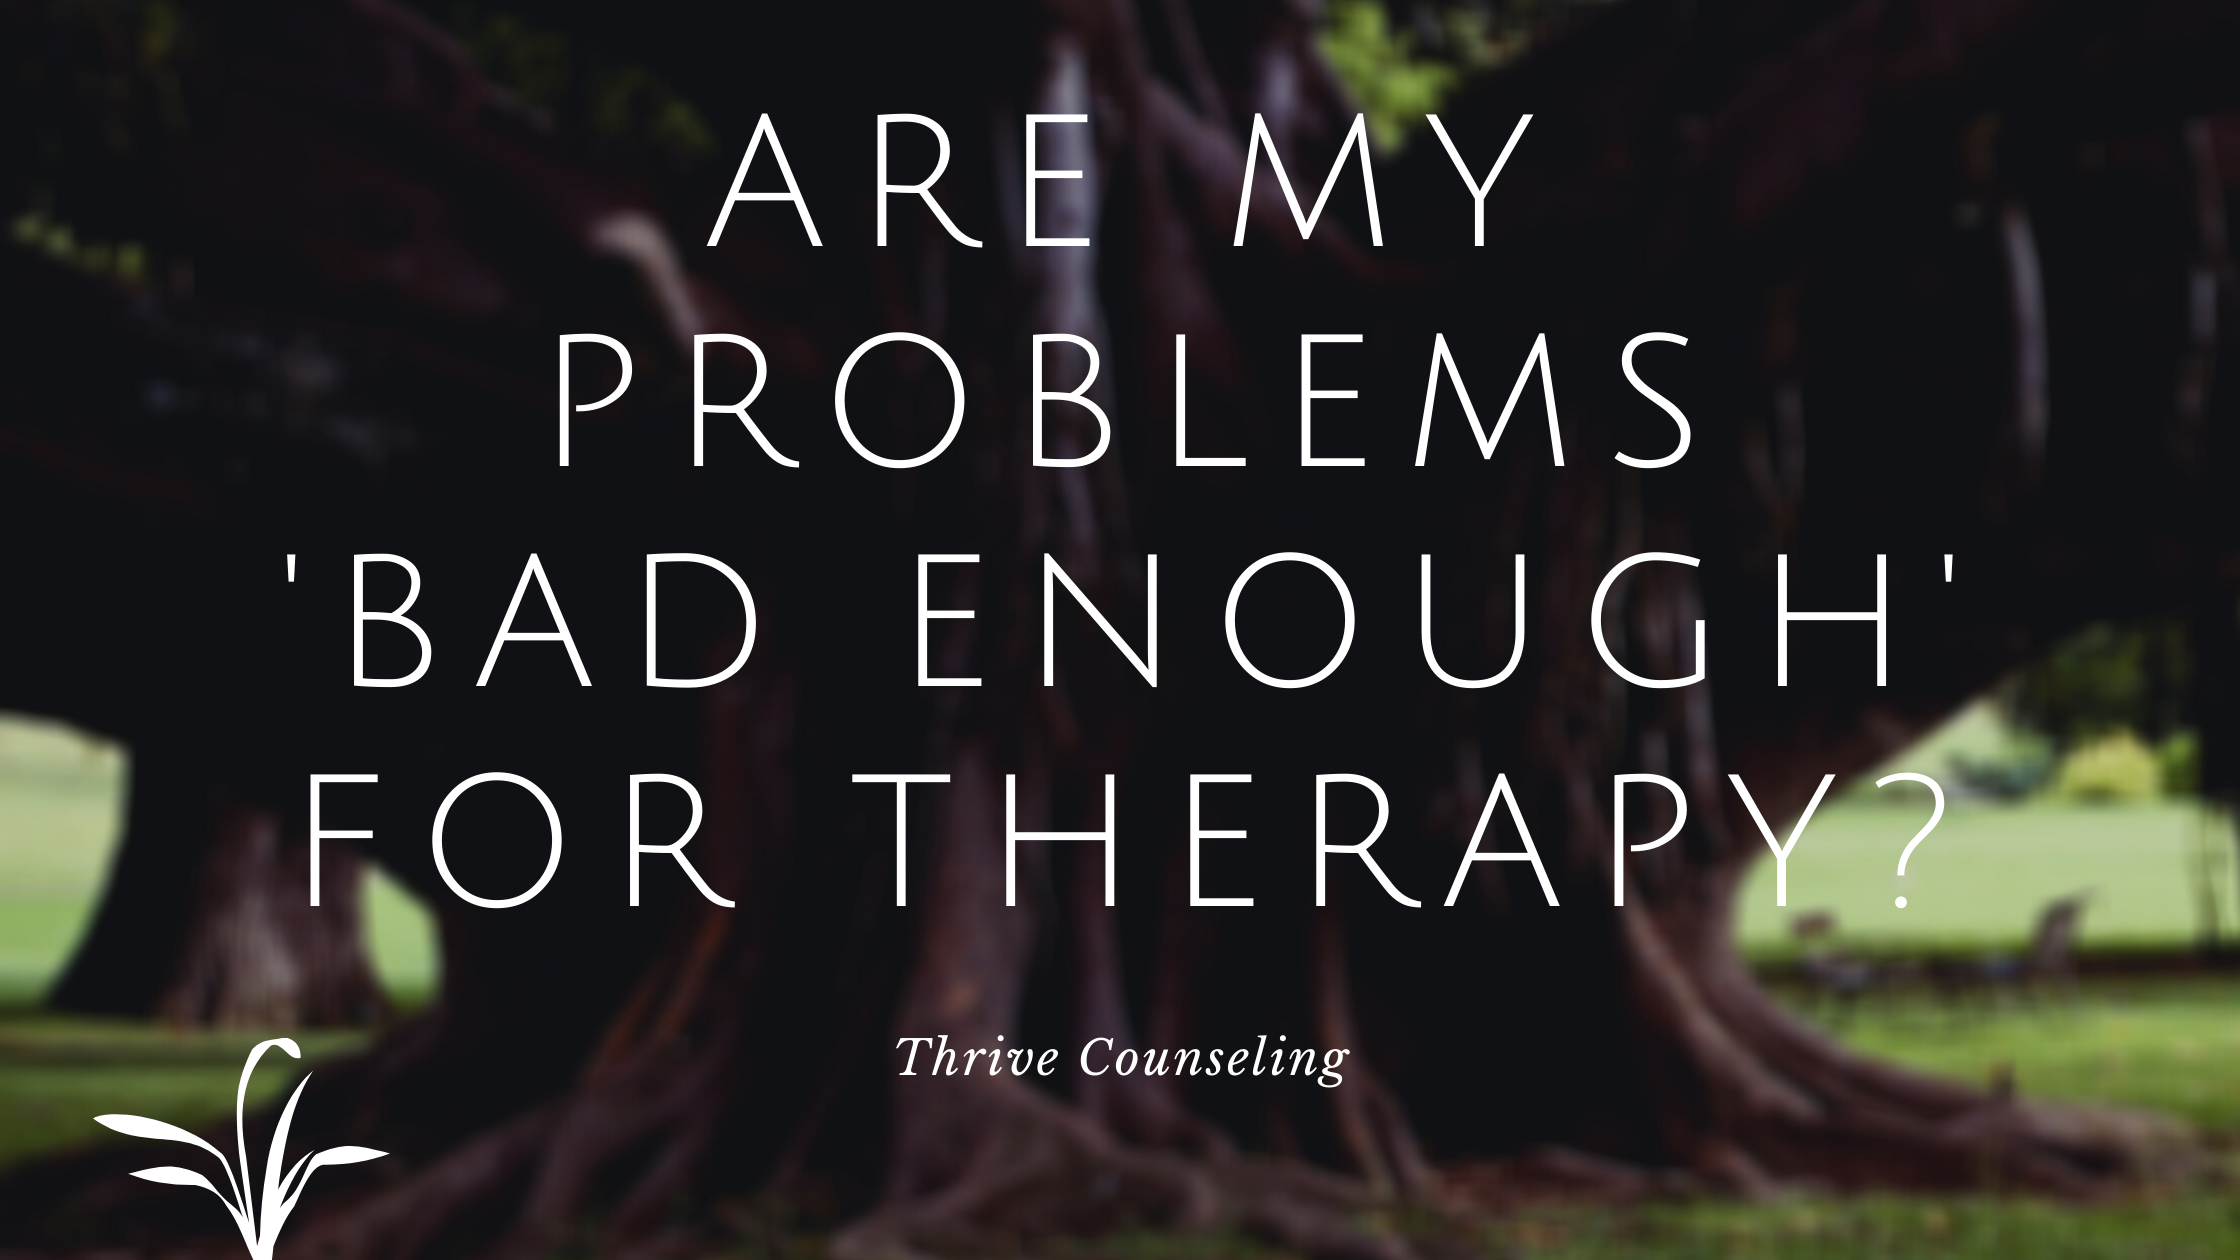 Are My Problems Bad Enough For therapy?